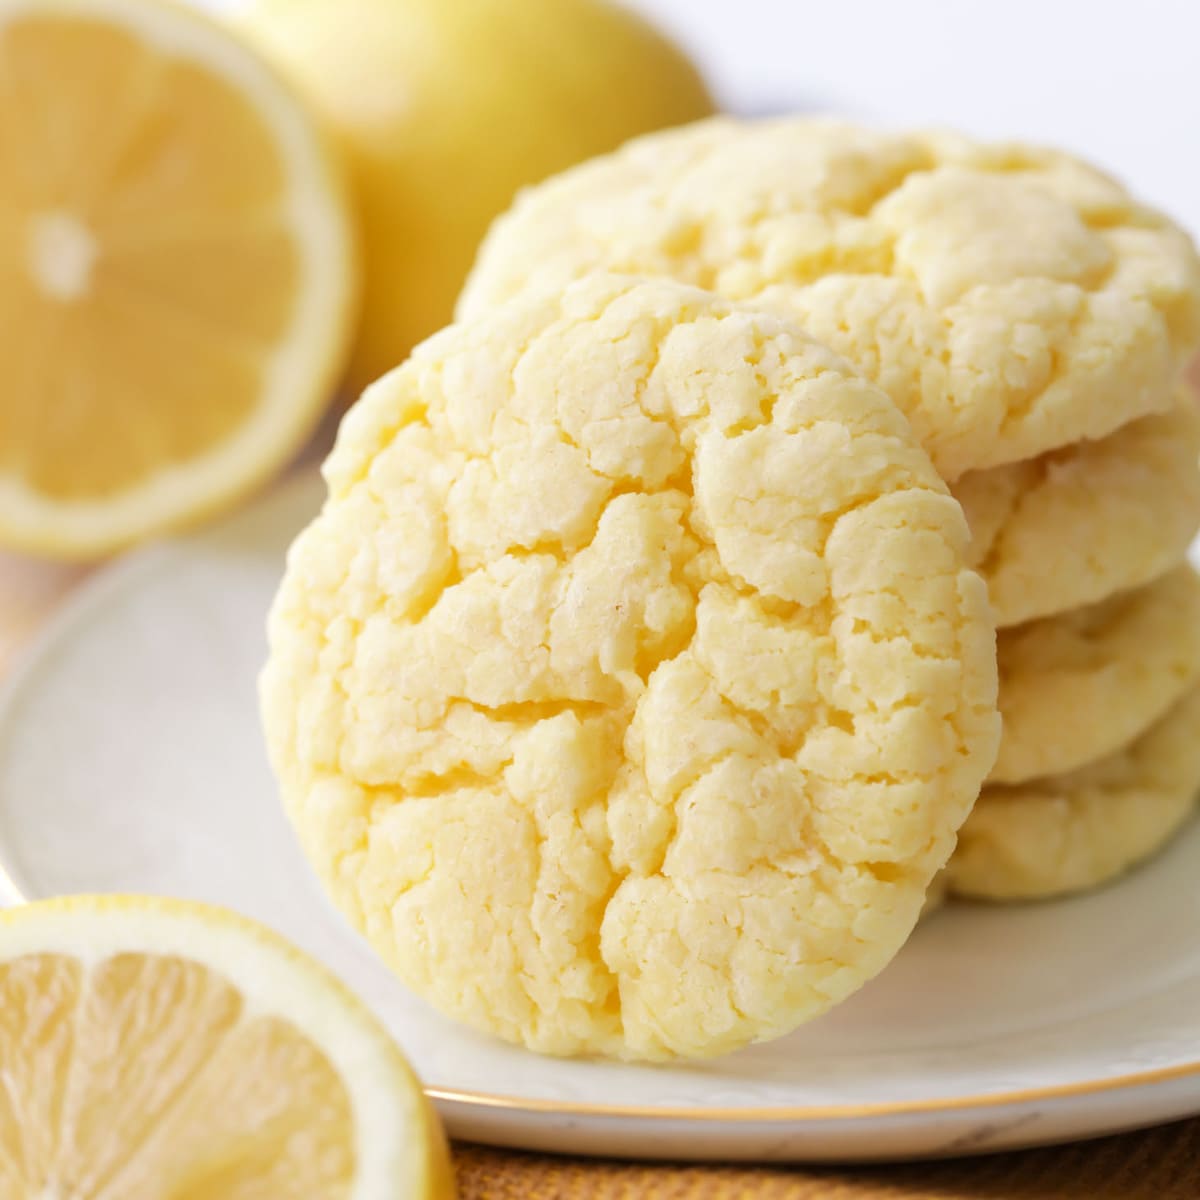 Easy cookie recipes - lemon cake mix cookies stacked on a white plate.